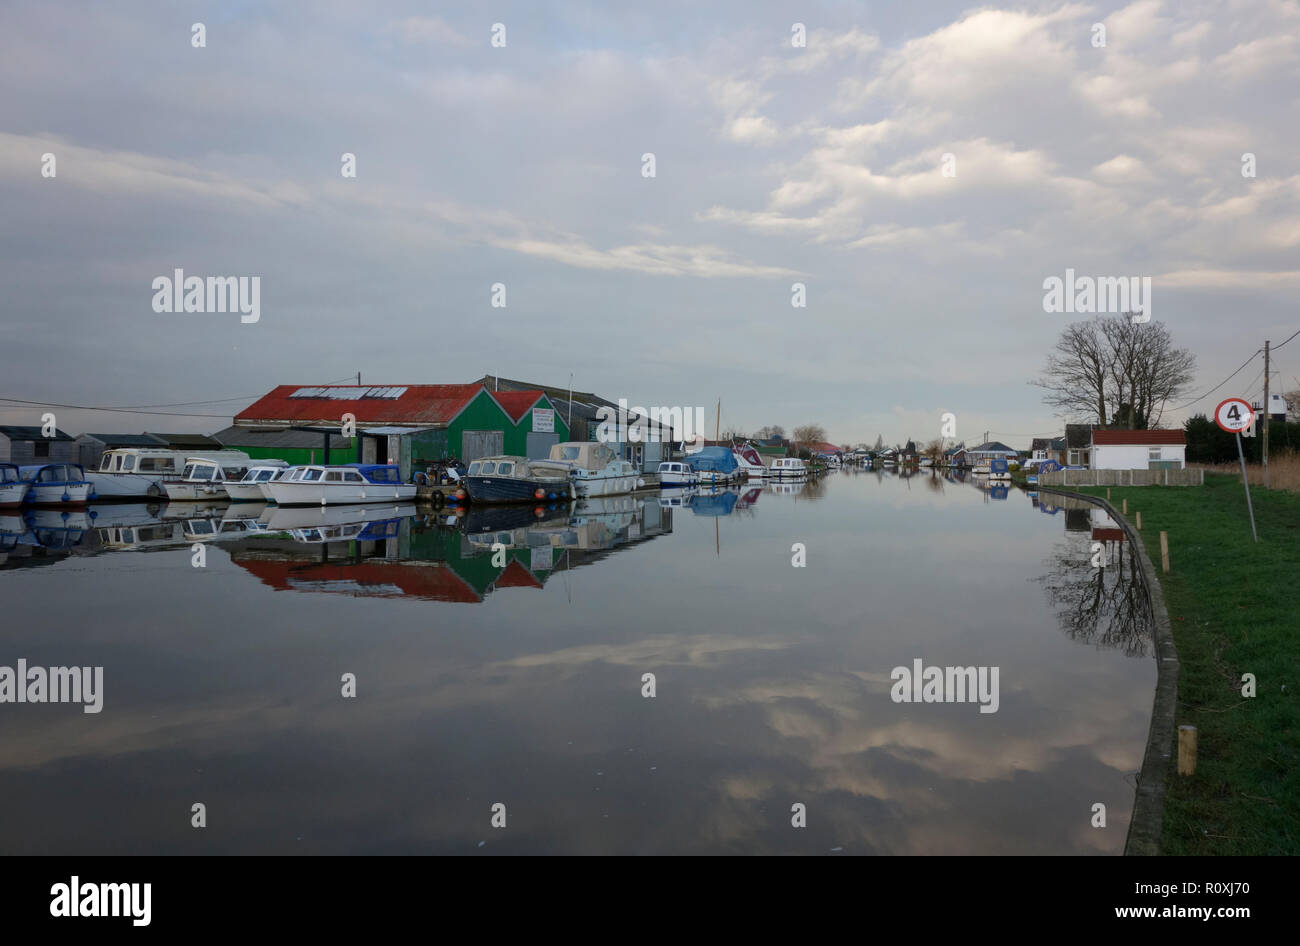 Boatsheds riflessa nel fiume Thurne a valle del Potter Heigham Foto Stock